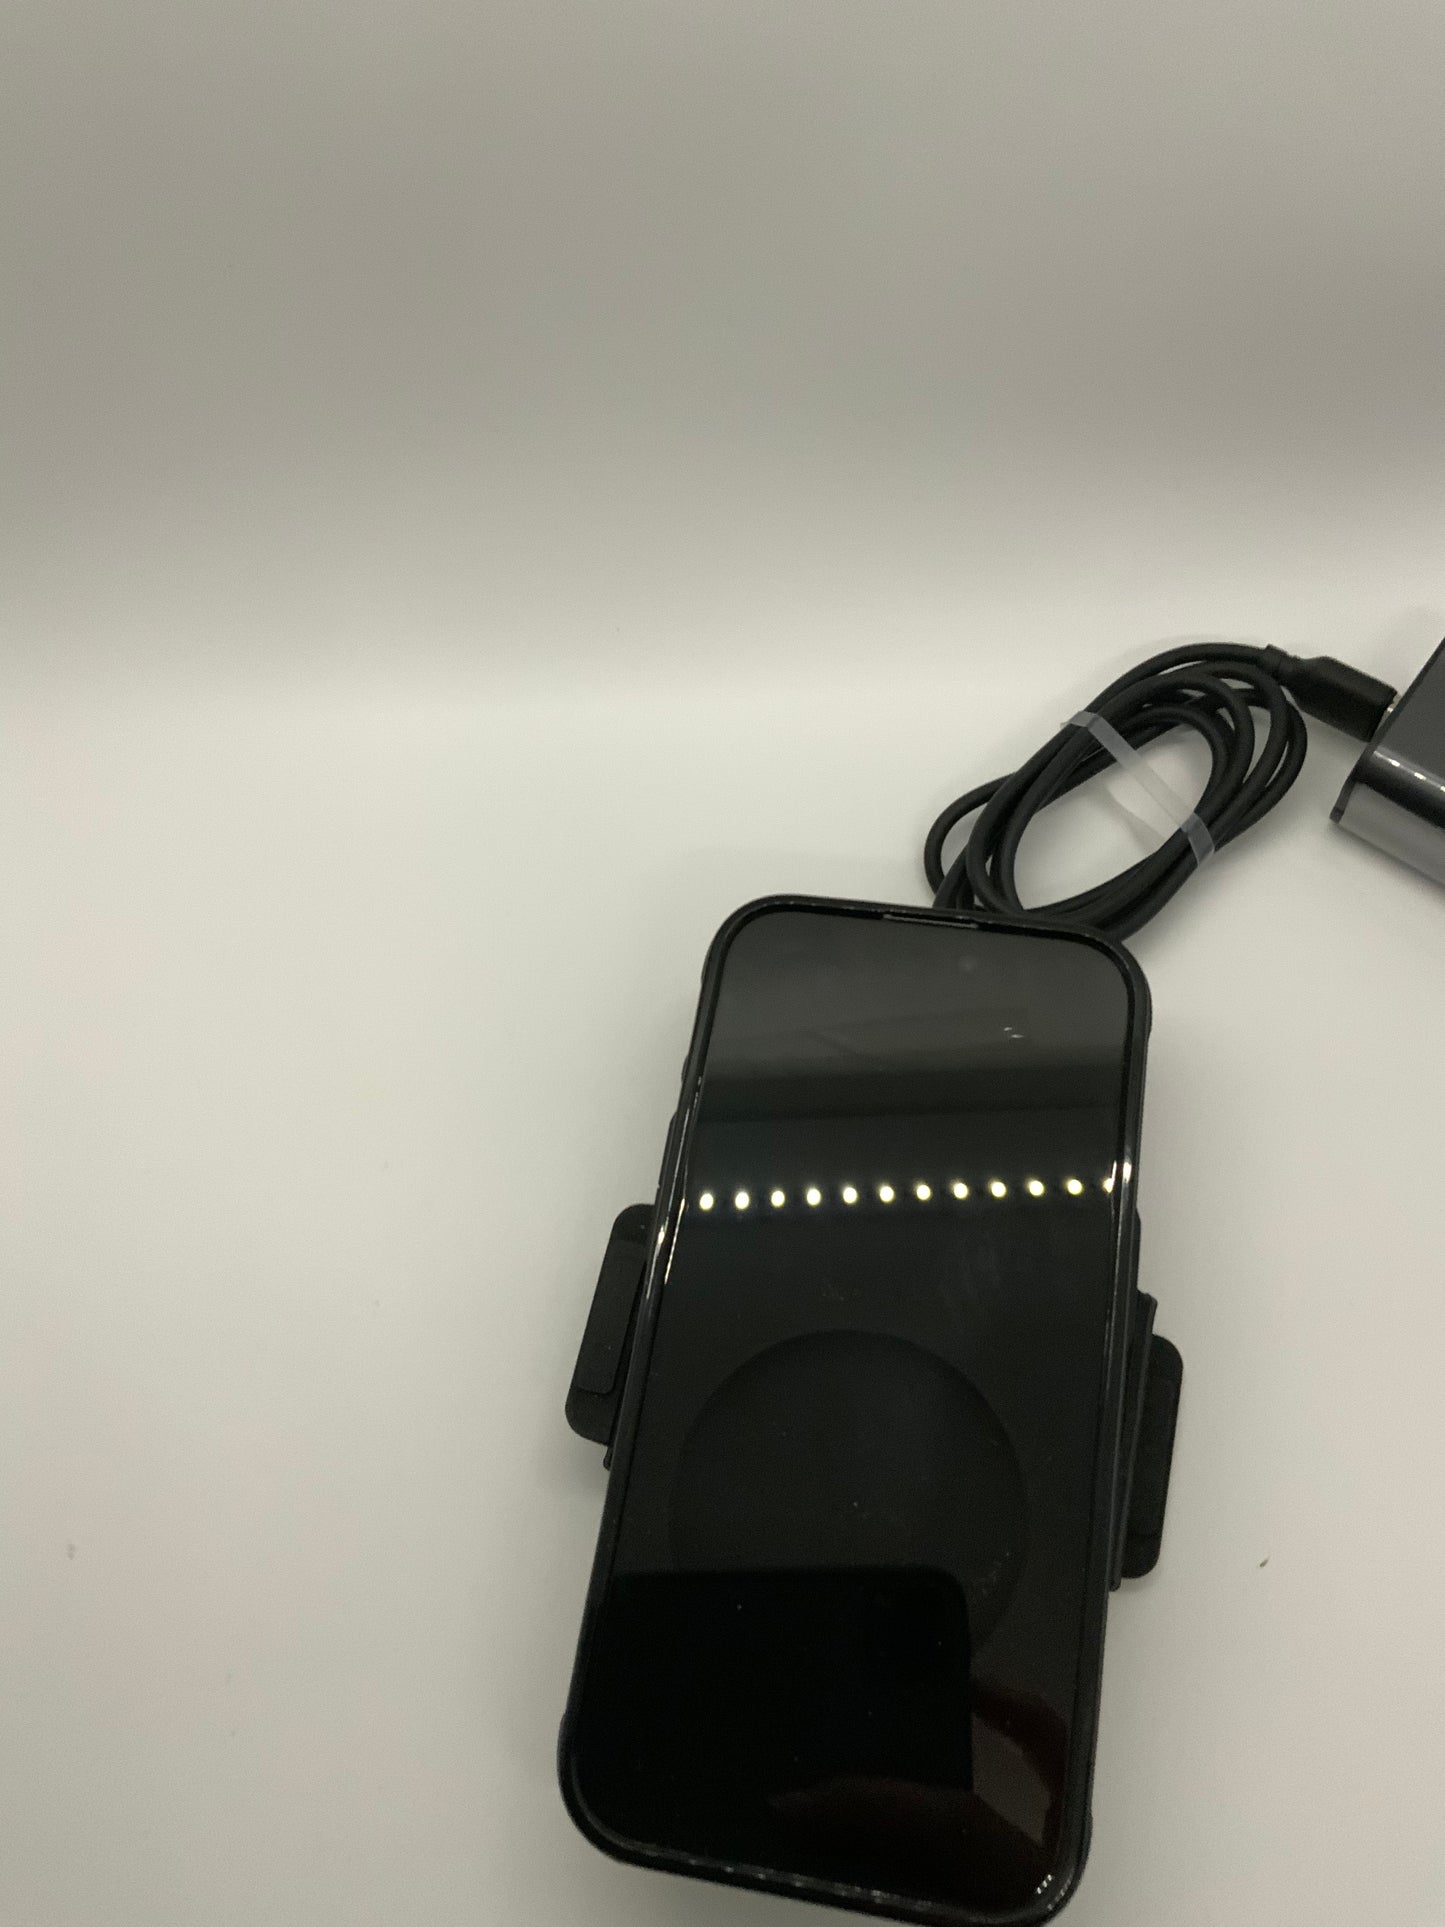 Be My AI: The picture shows a smartphone placed on a white surface. The smartphone is black and has a reflective screen. It is placed in a horizontal position and is attached to a black holder with clips on the sides. There is also a black cable coiled next to the smartphone, and it seems to be a charging cable. The background is plain white and there is a reflection of lights on the smartphone screen.